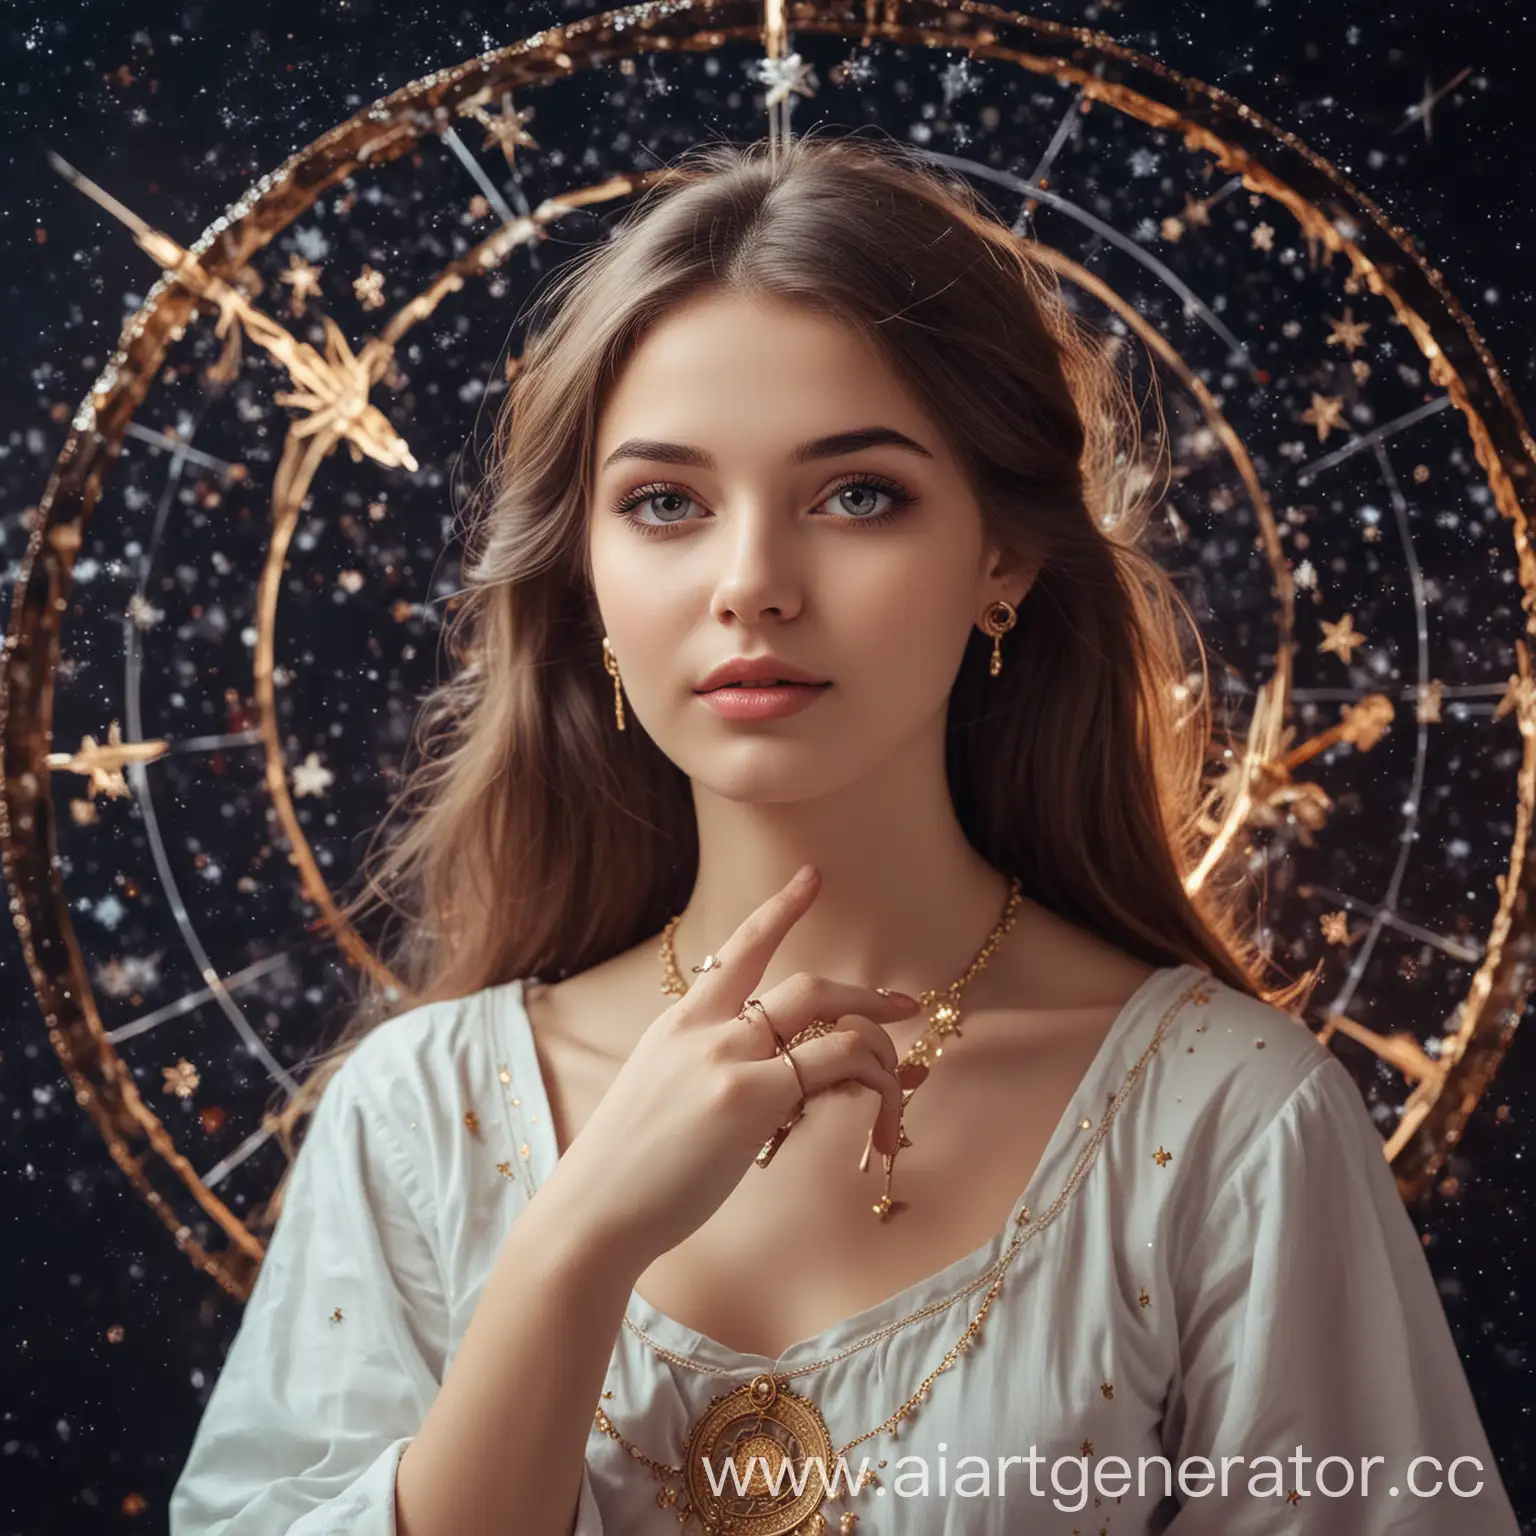 Beautiful-Astrologer-Girl-Reading-Celestial-Charts